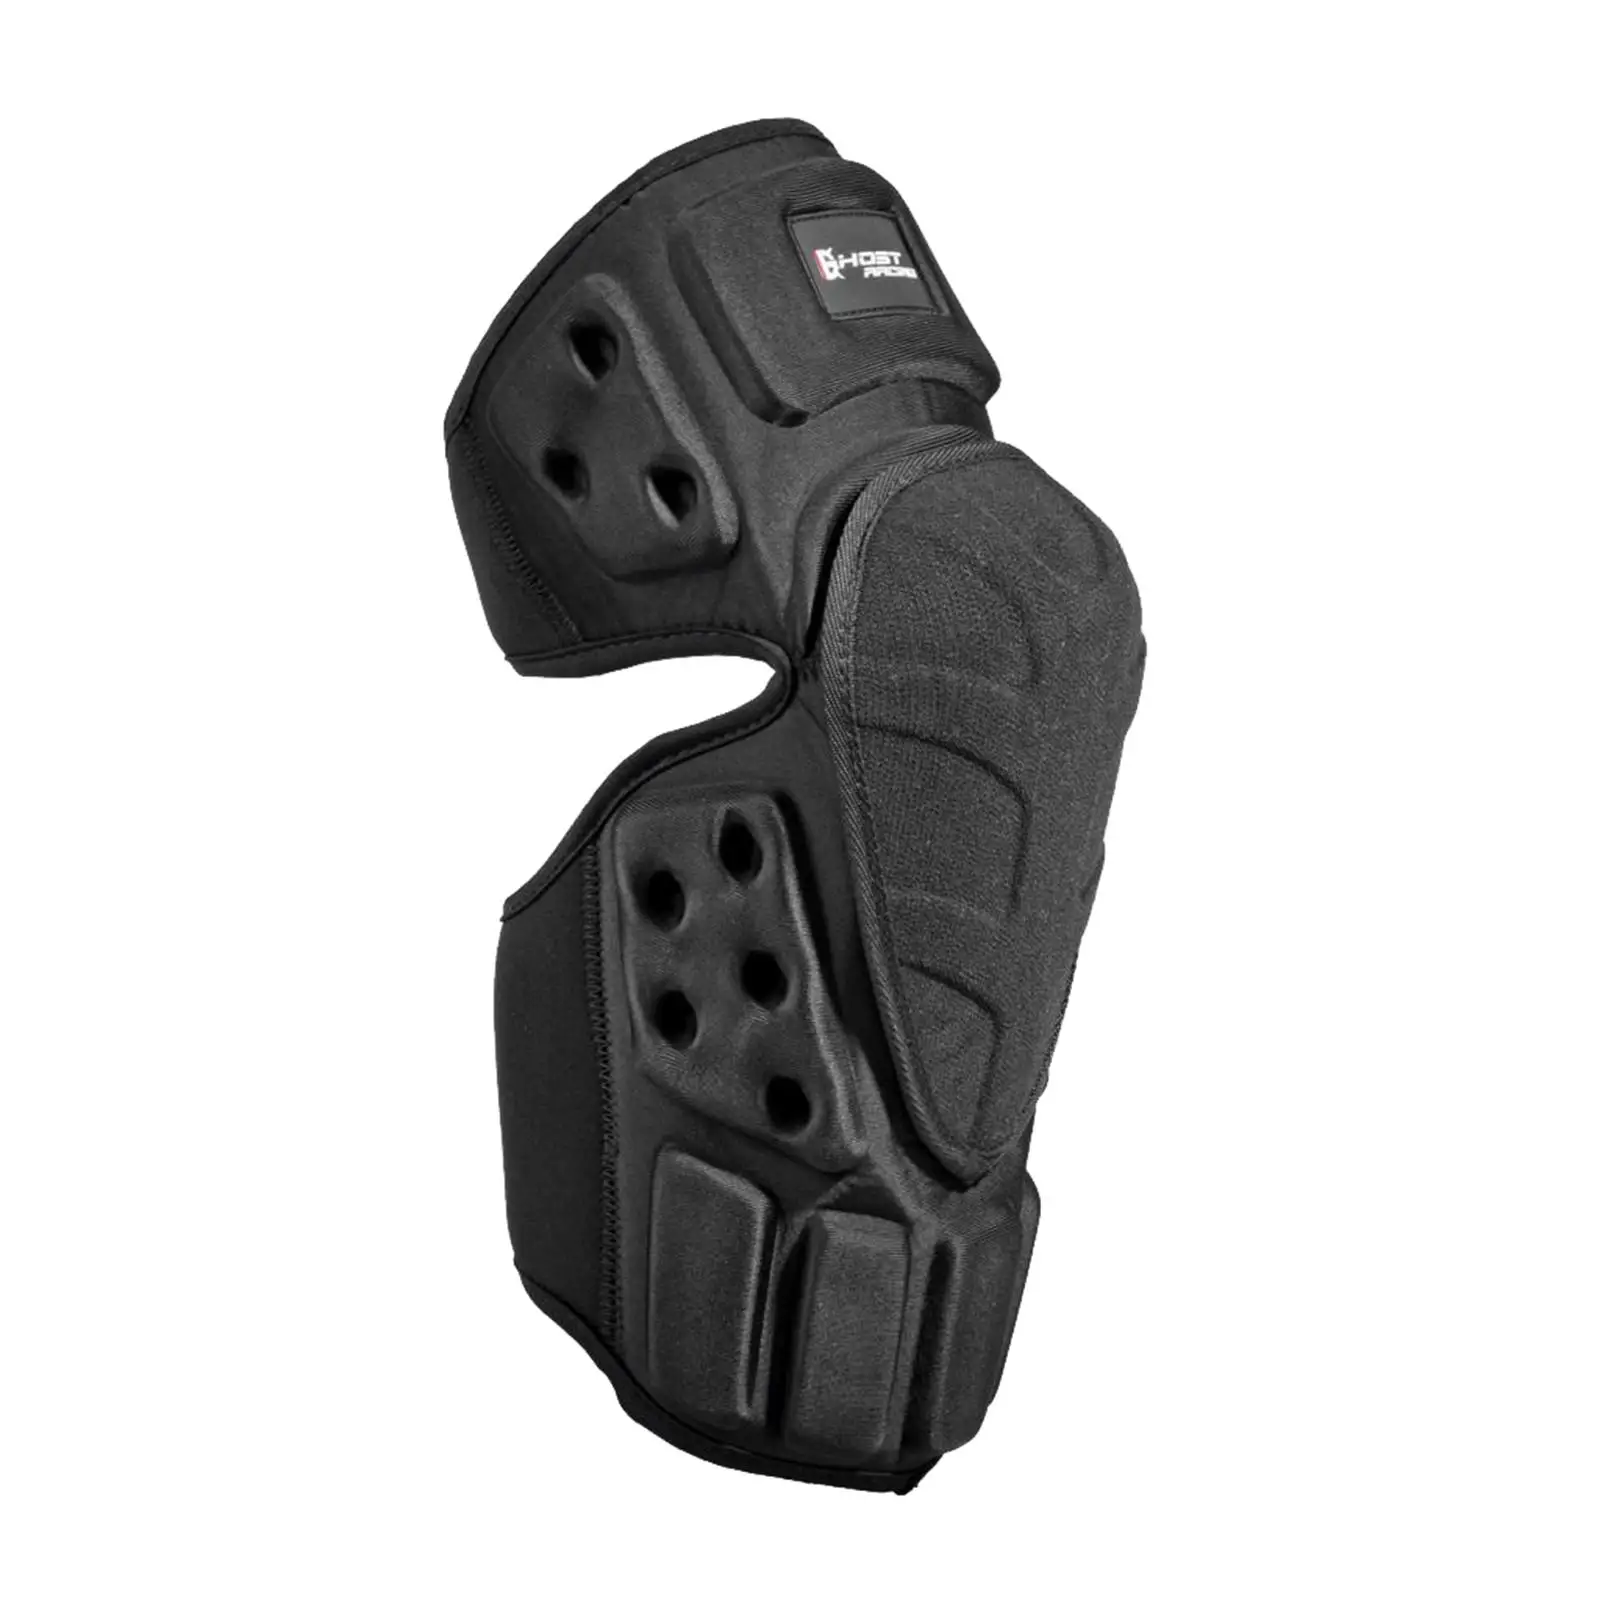 Racing Knee Guards Arm Guards Protective Equipment for Motocross